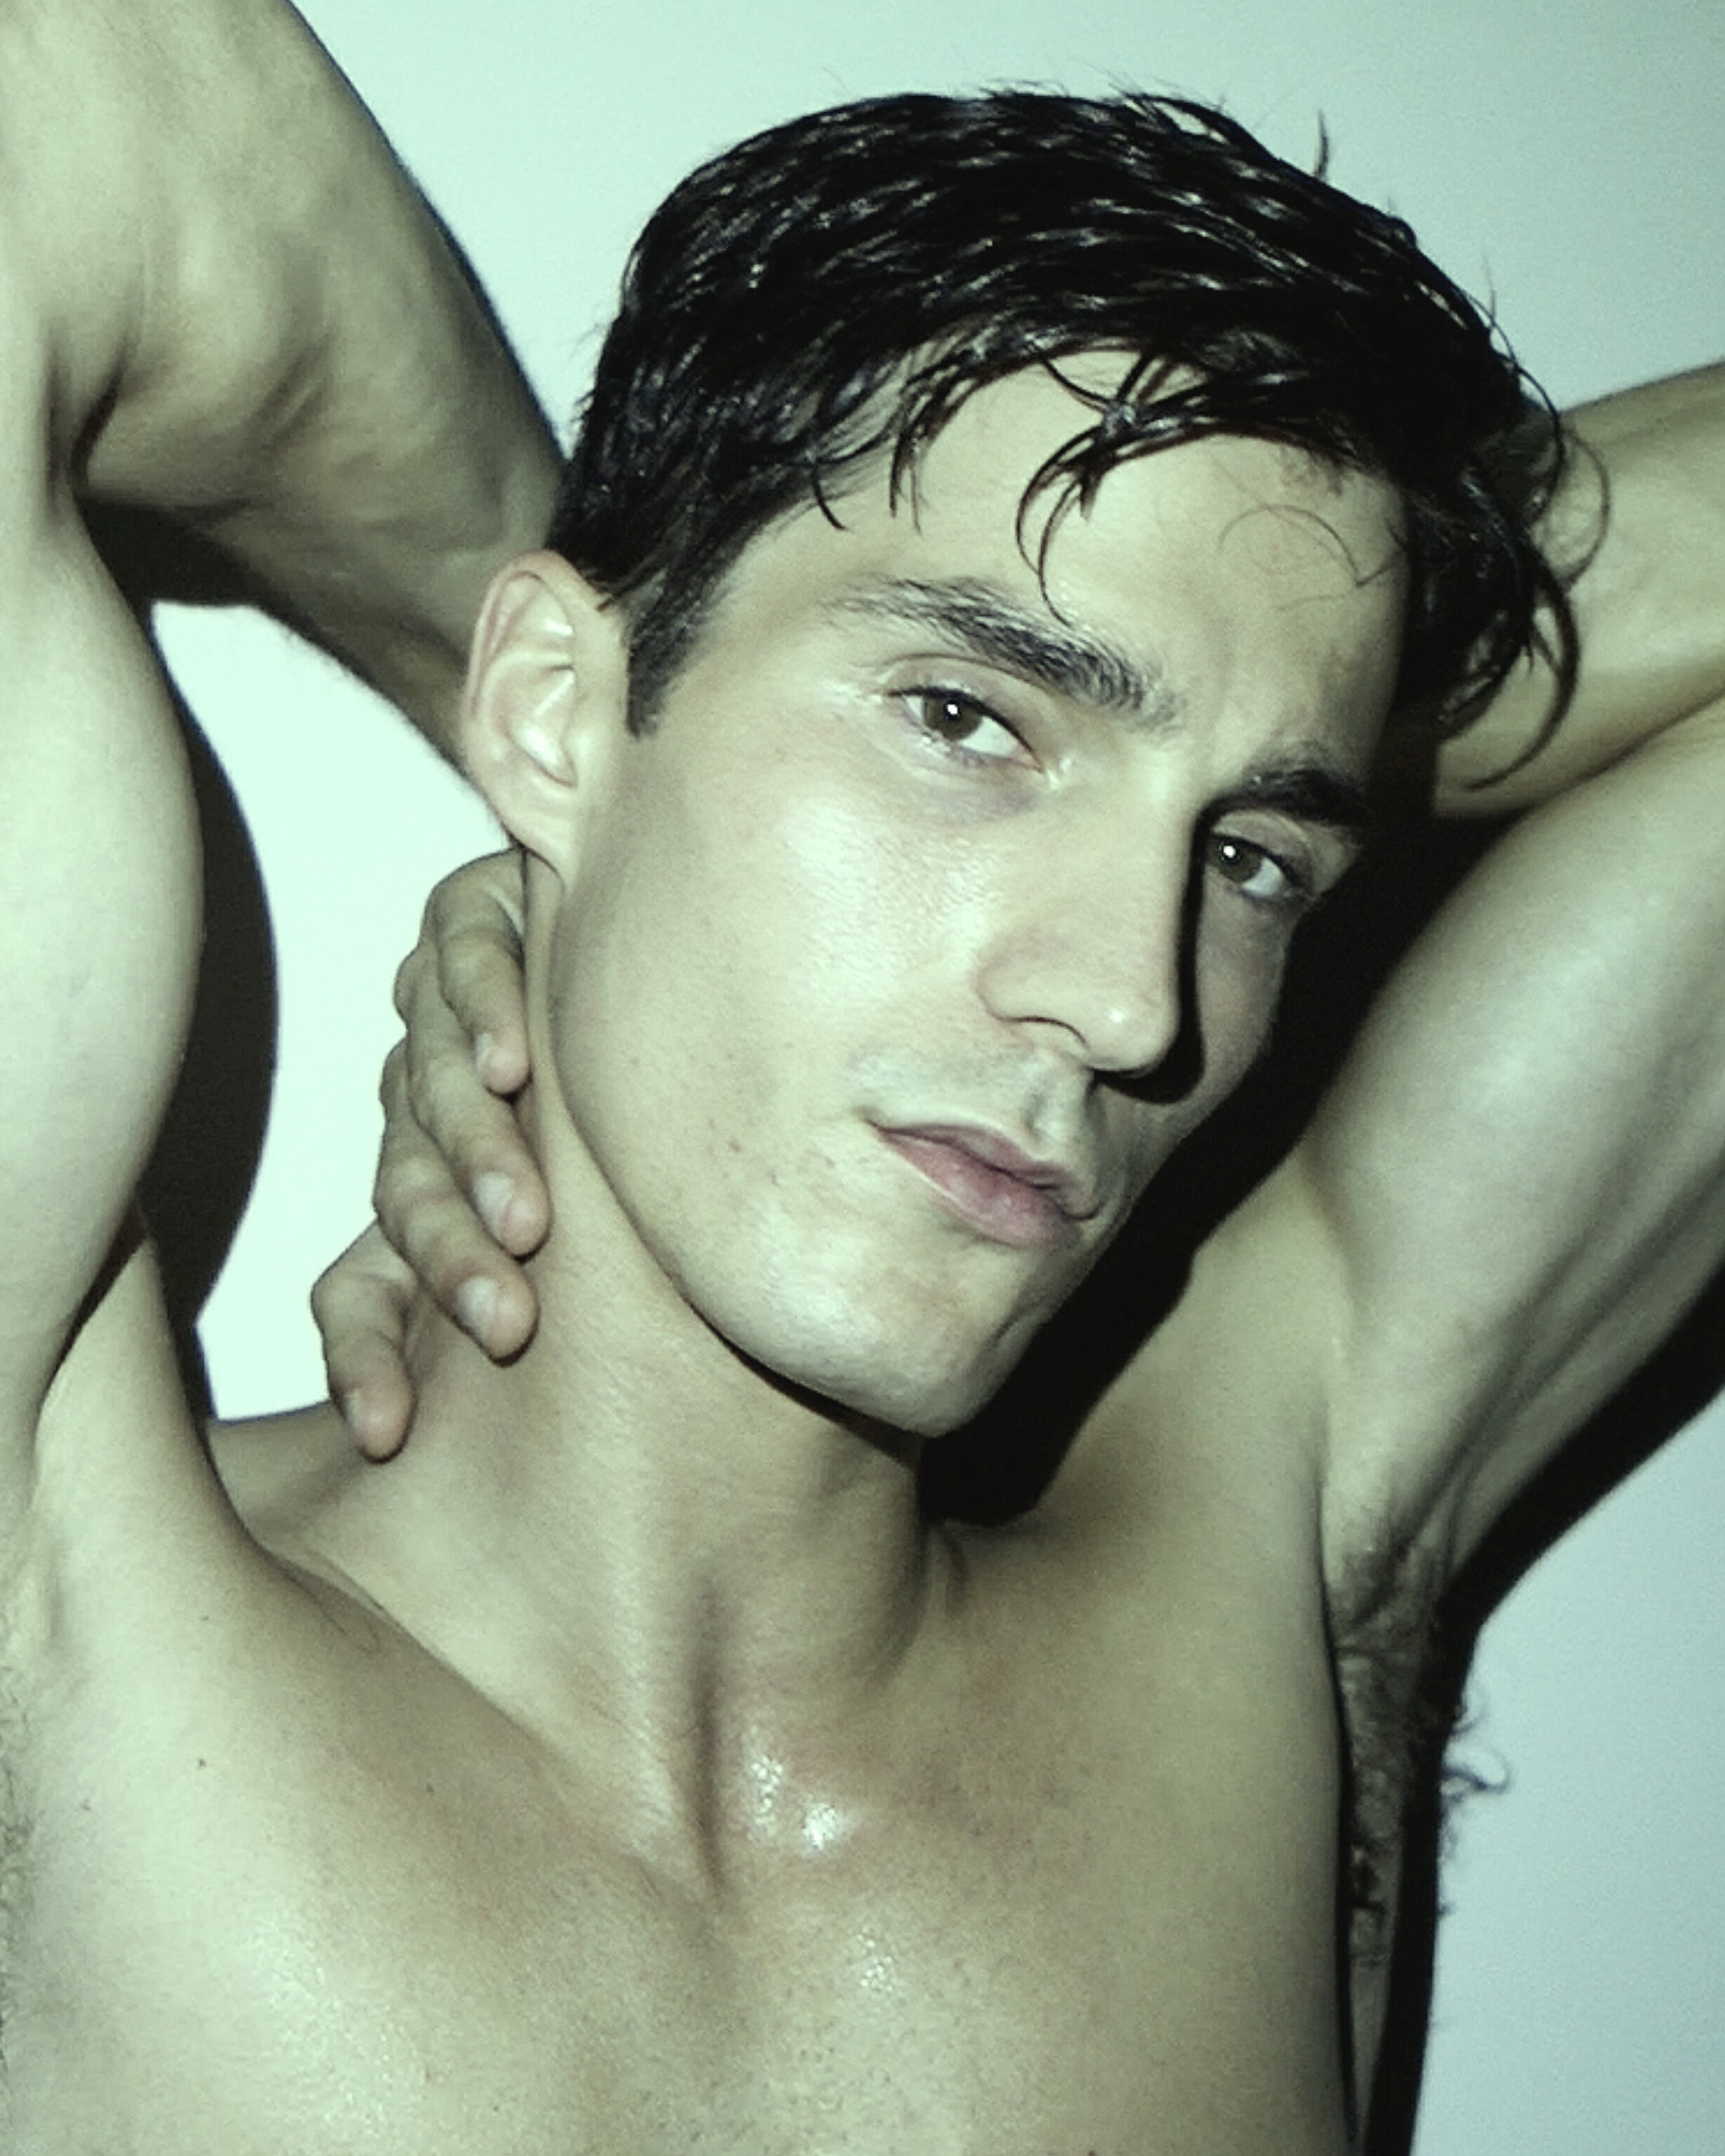 Featuring Tony Pilato photographed by Ron Wan in Milan, Italy.